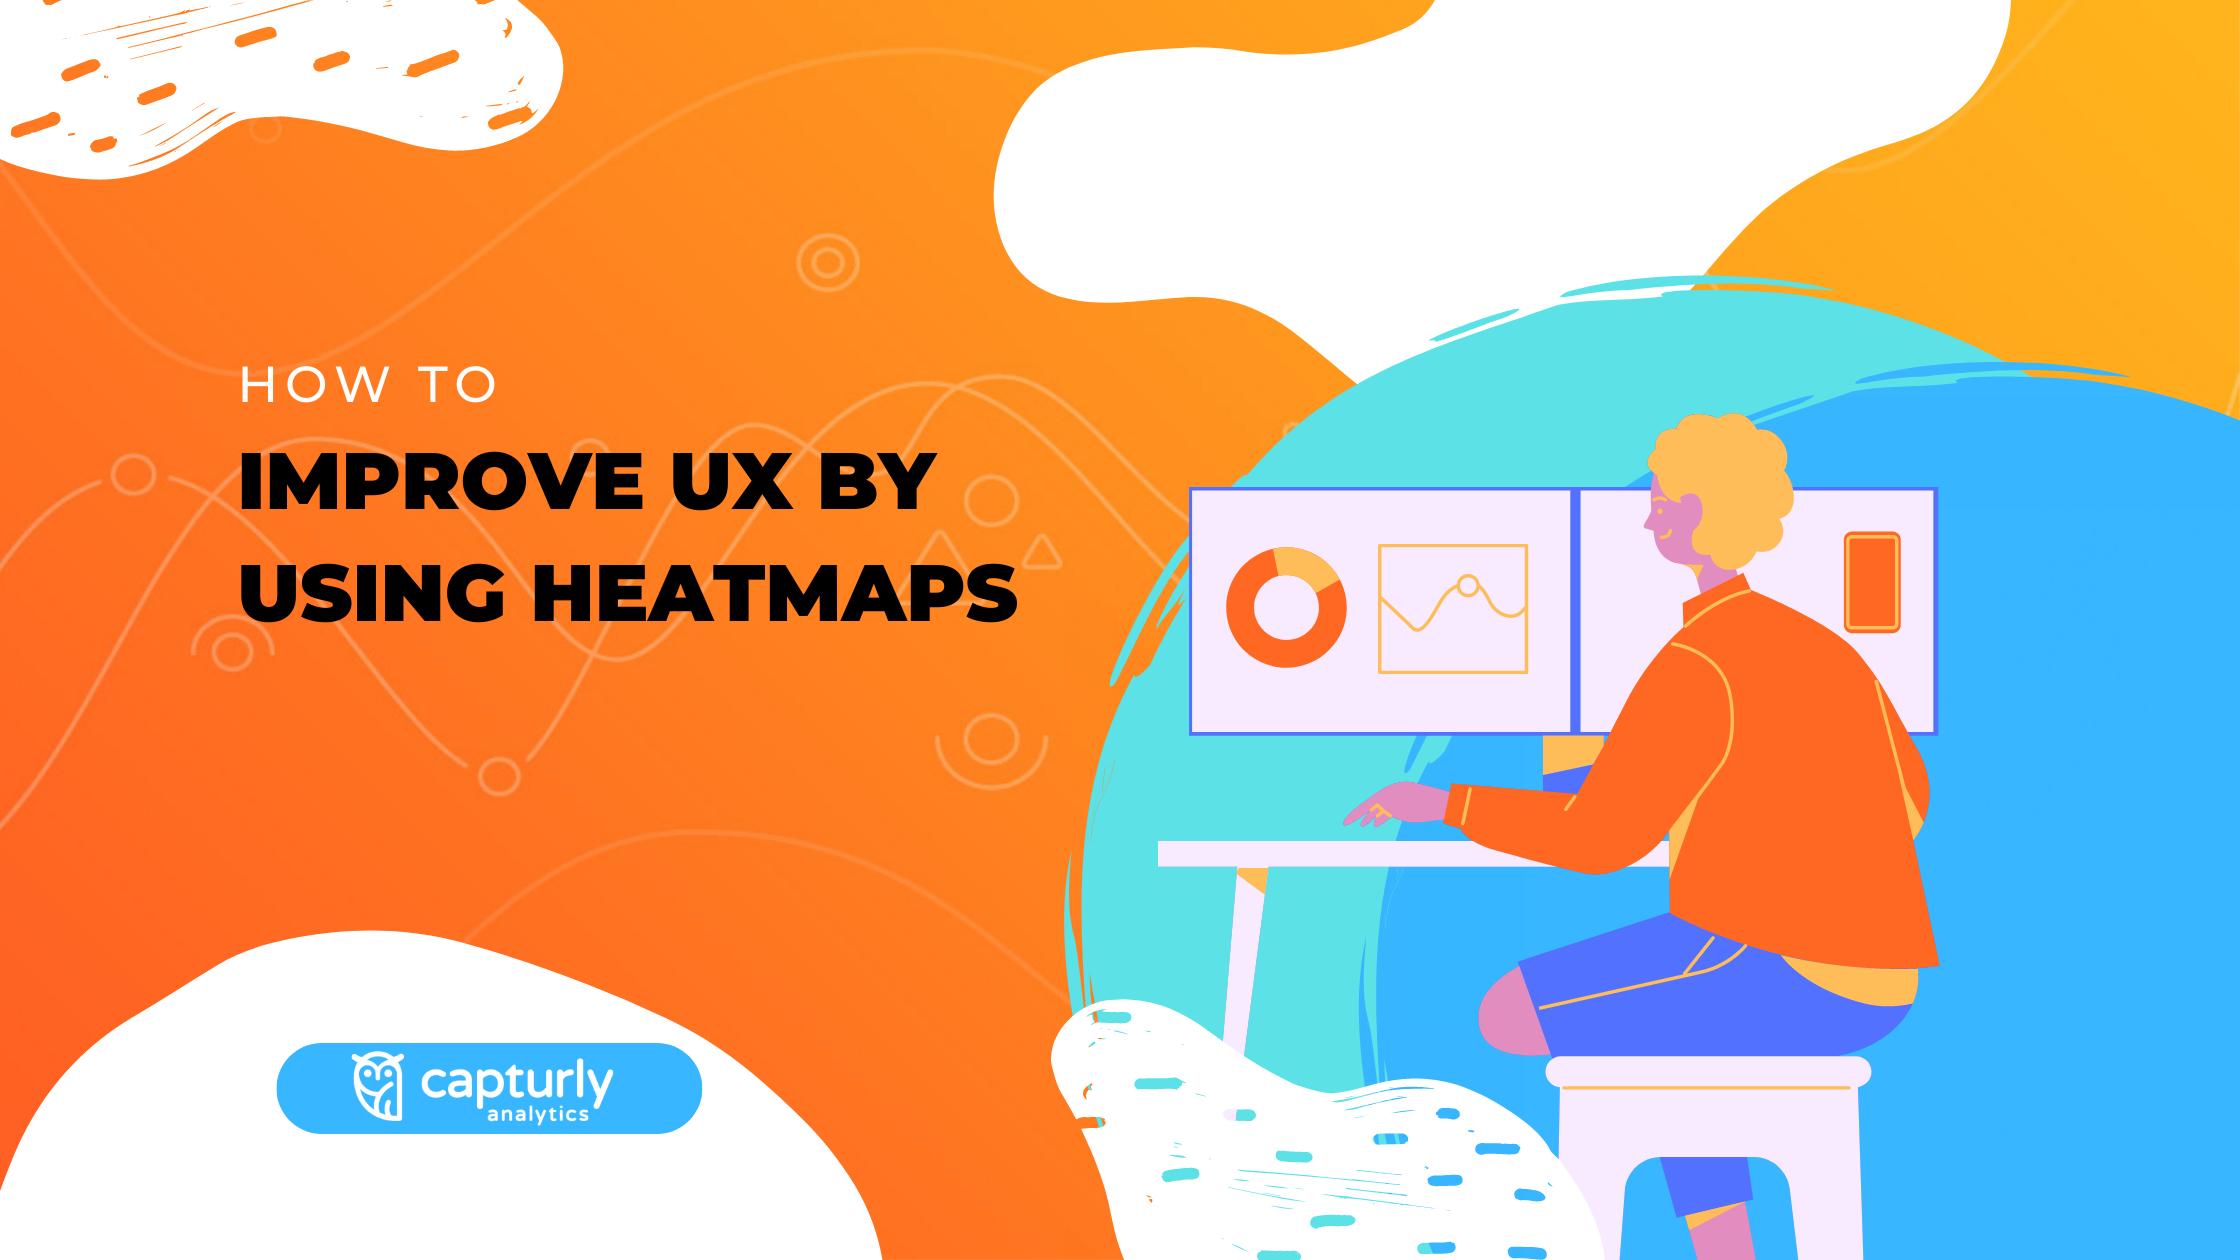 How to Improve UX by Using Heatmaps